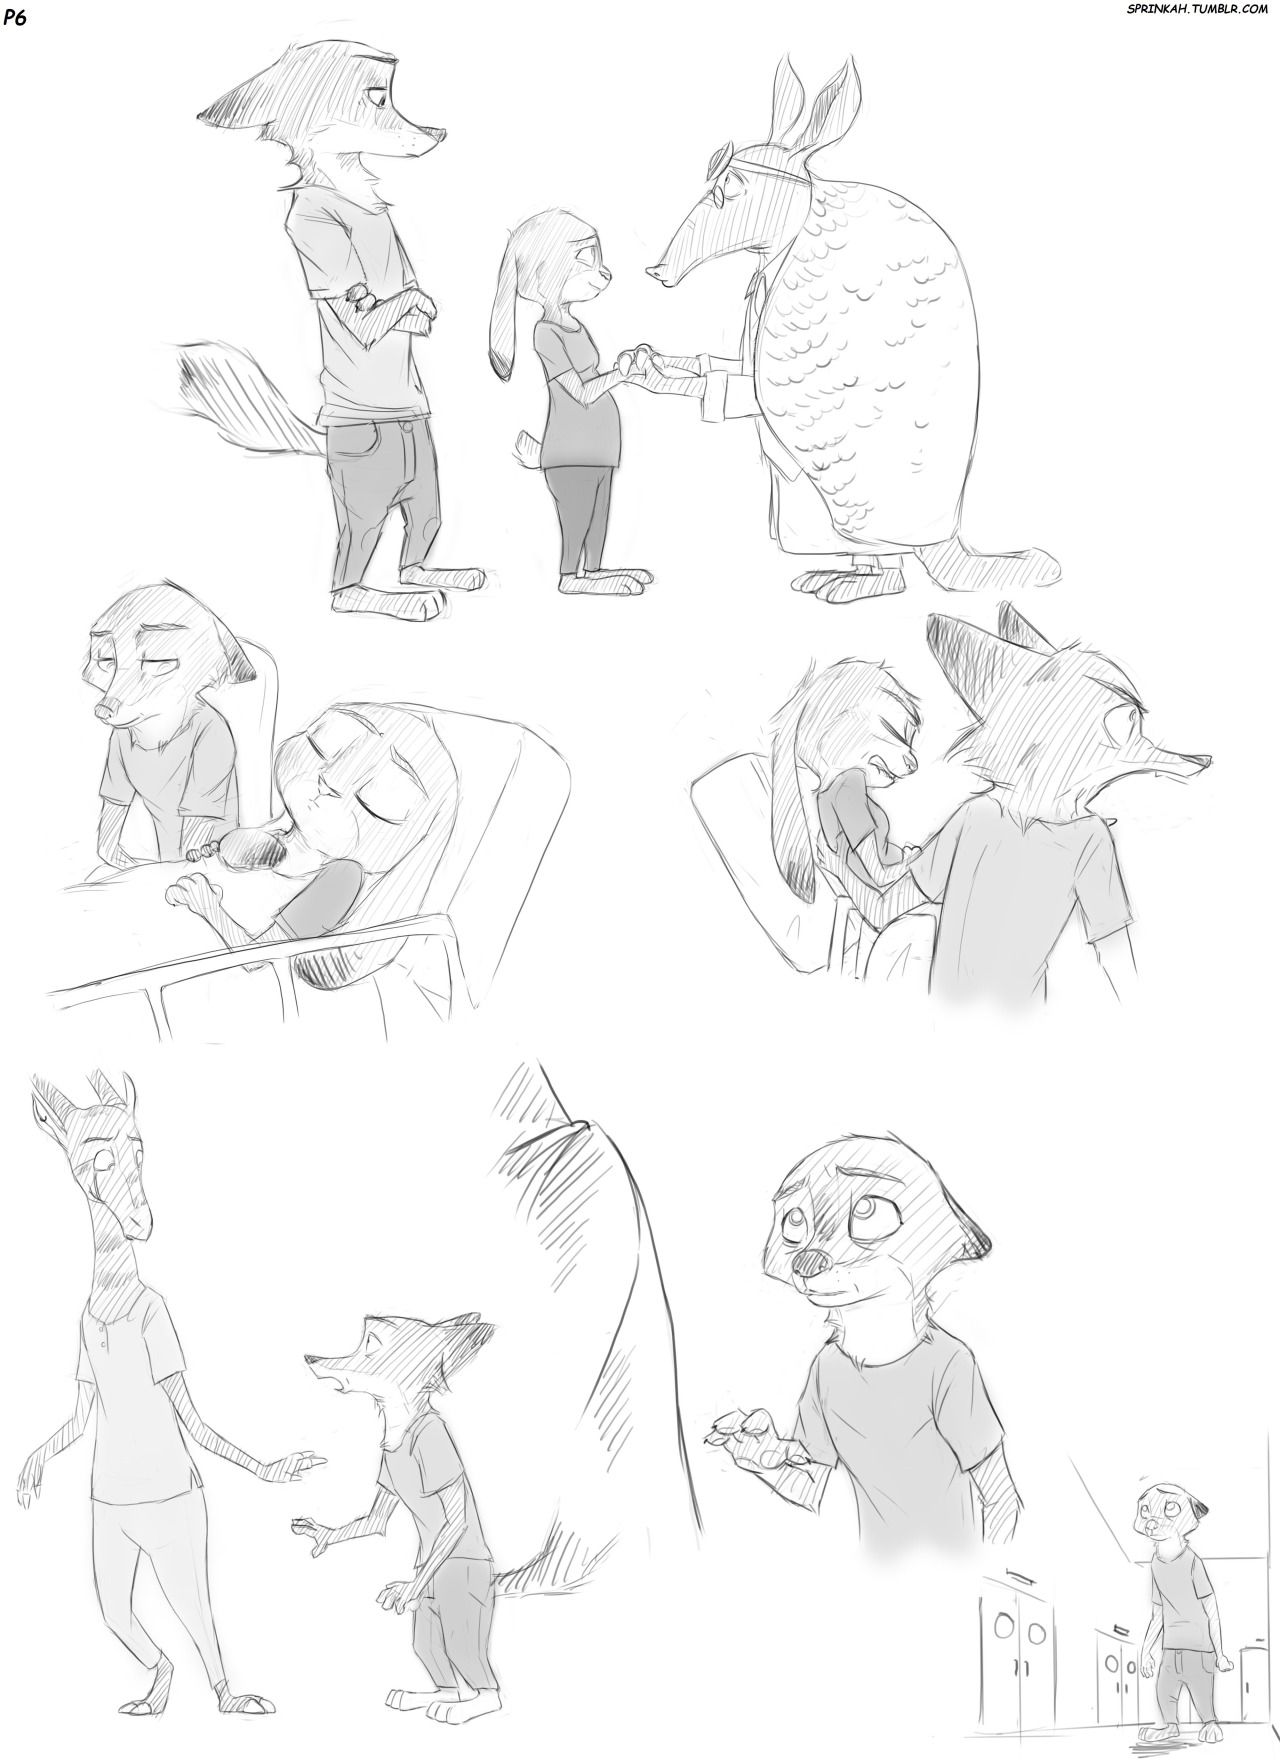 [Sprinkah] This is what true love looks like (Zootopia) (Spanish) (On Going) [Landsec] http://sprinkah.tumblr.com/ 11